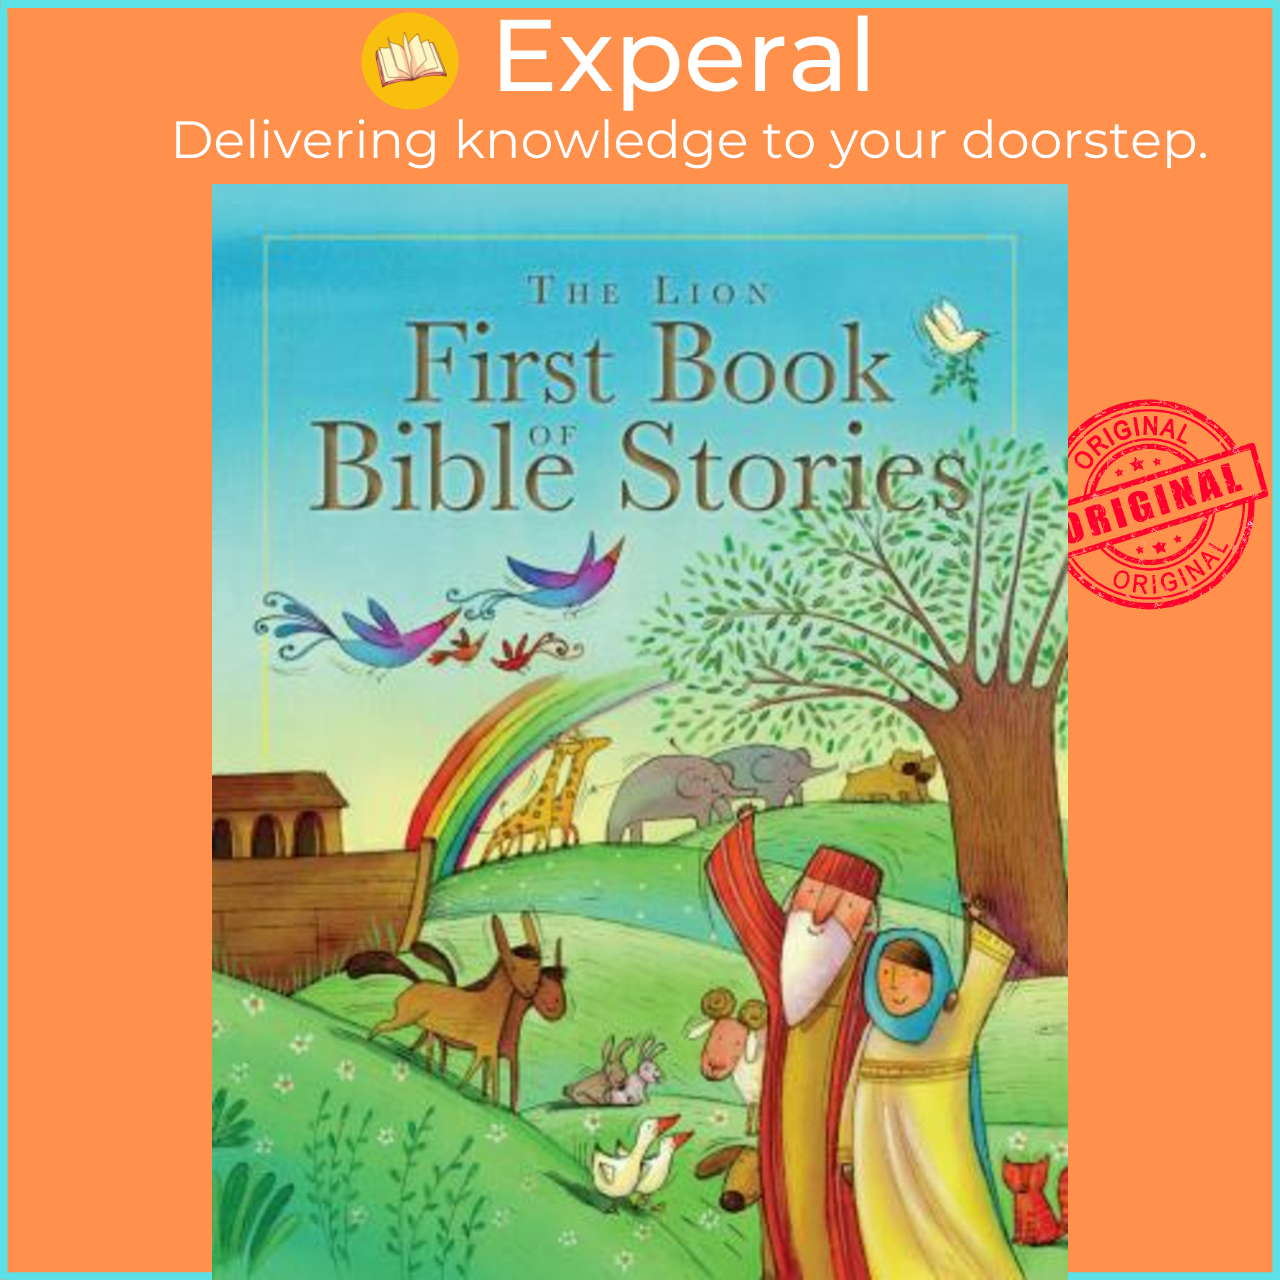 Book　Lazada　Stories　The　First　hardcover)　(UK　Lion　edition,　of　Rock　Bible　by　Lois　Singapore